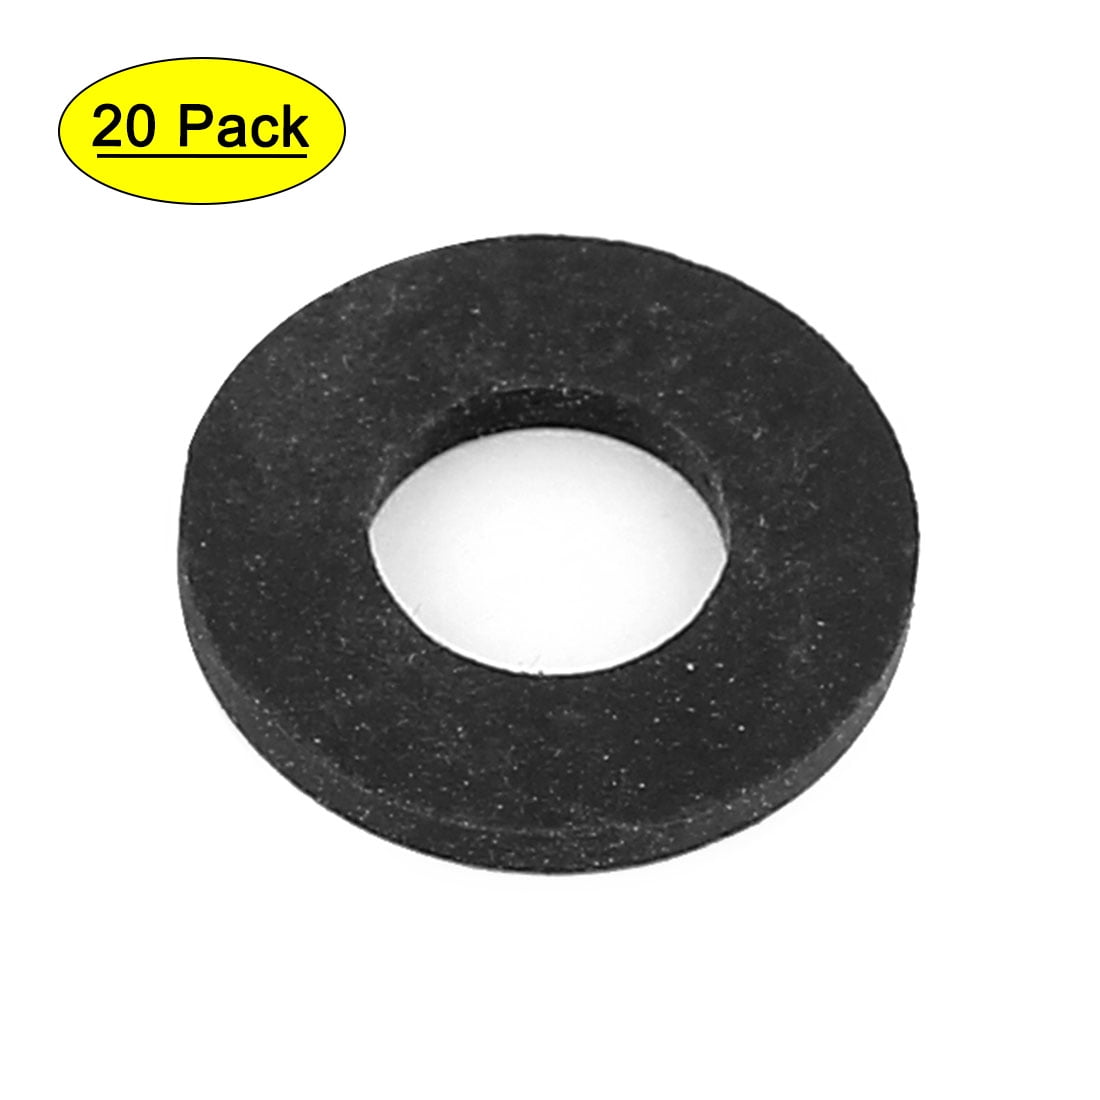 20Pcs Black Rubber Shower Hose Washers Rings Seals For Tube Pipe Bath Head 